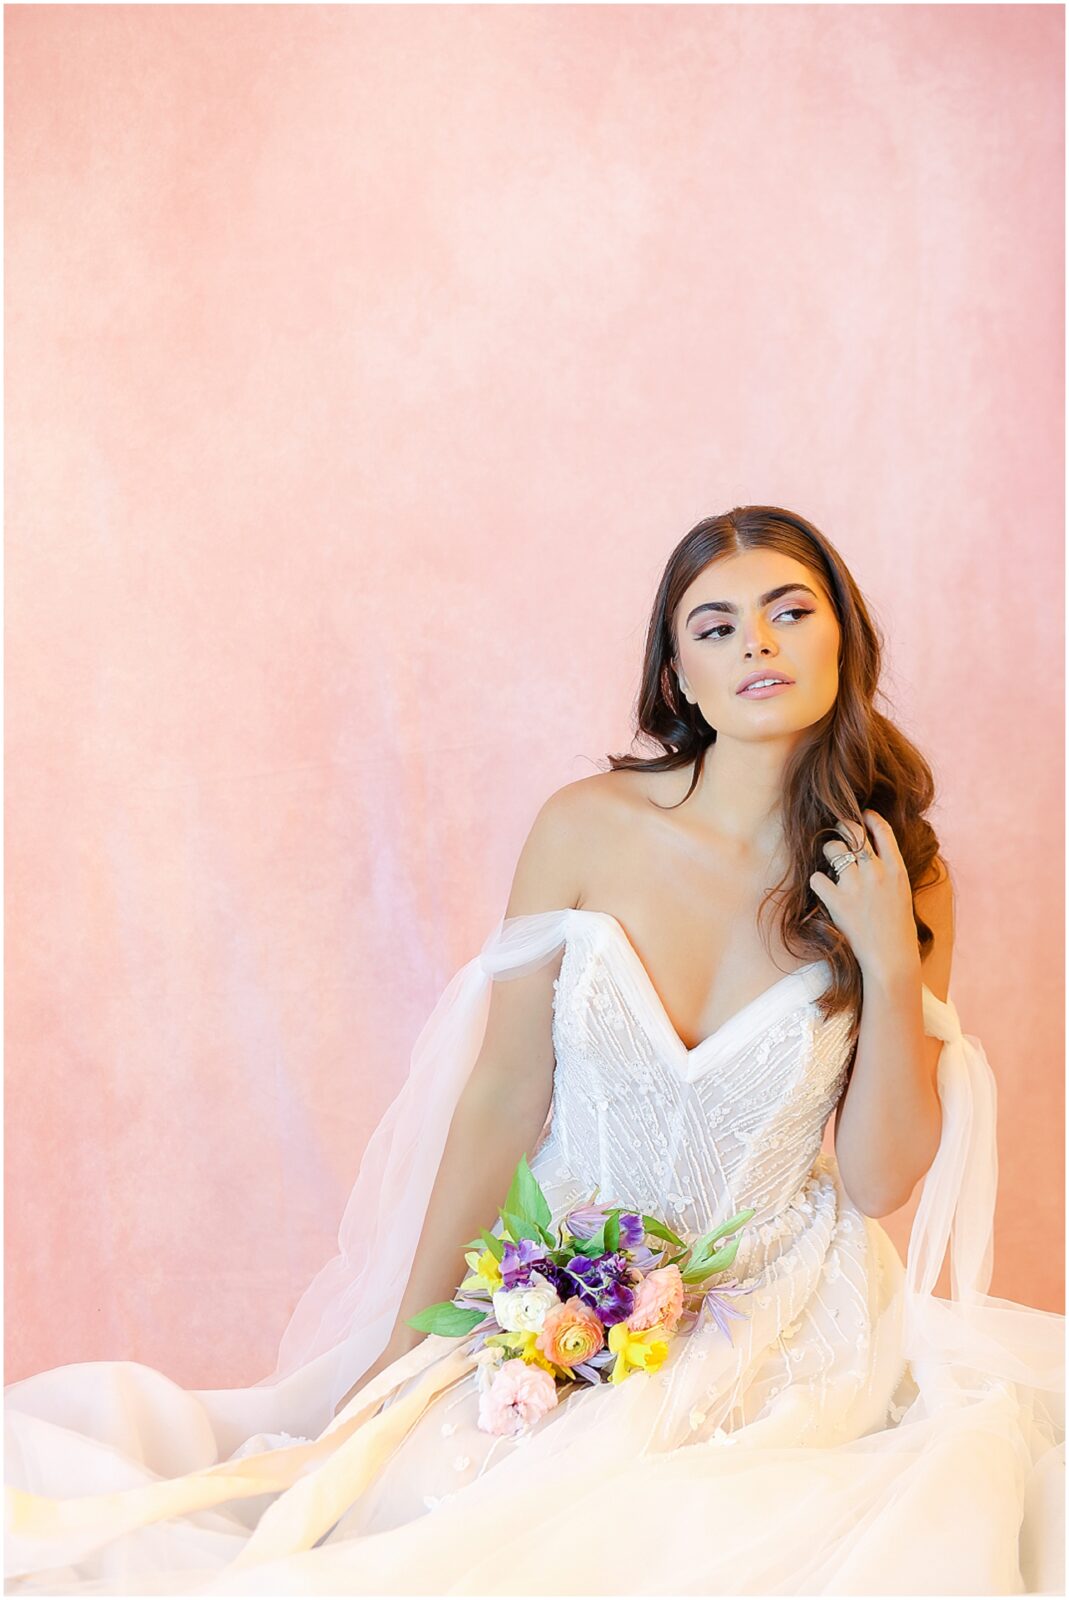 Mariam Saifan Photography's lens captures the magic of a pink retro wedding

Bridal Extraordinaire's elegant wedding gown shines in this pink-themed wedding